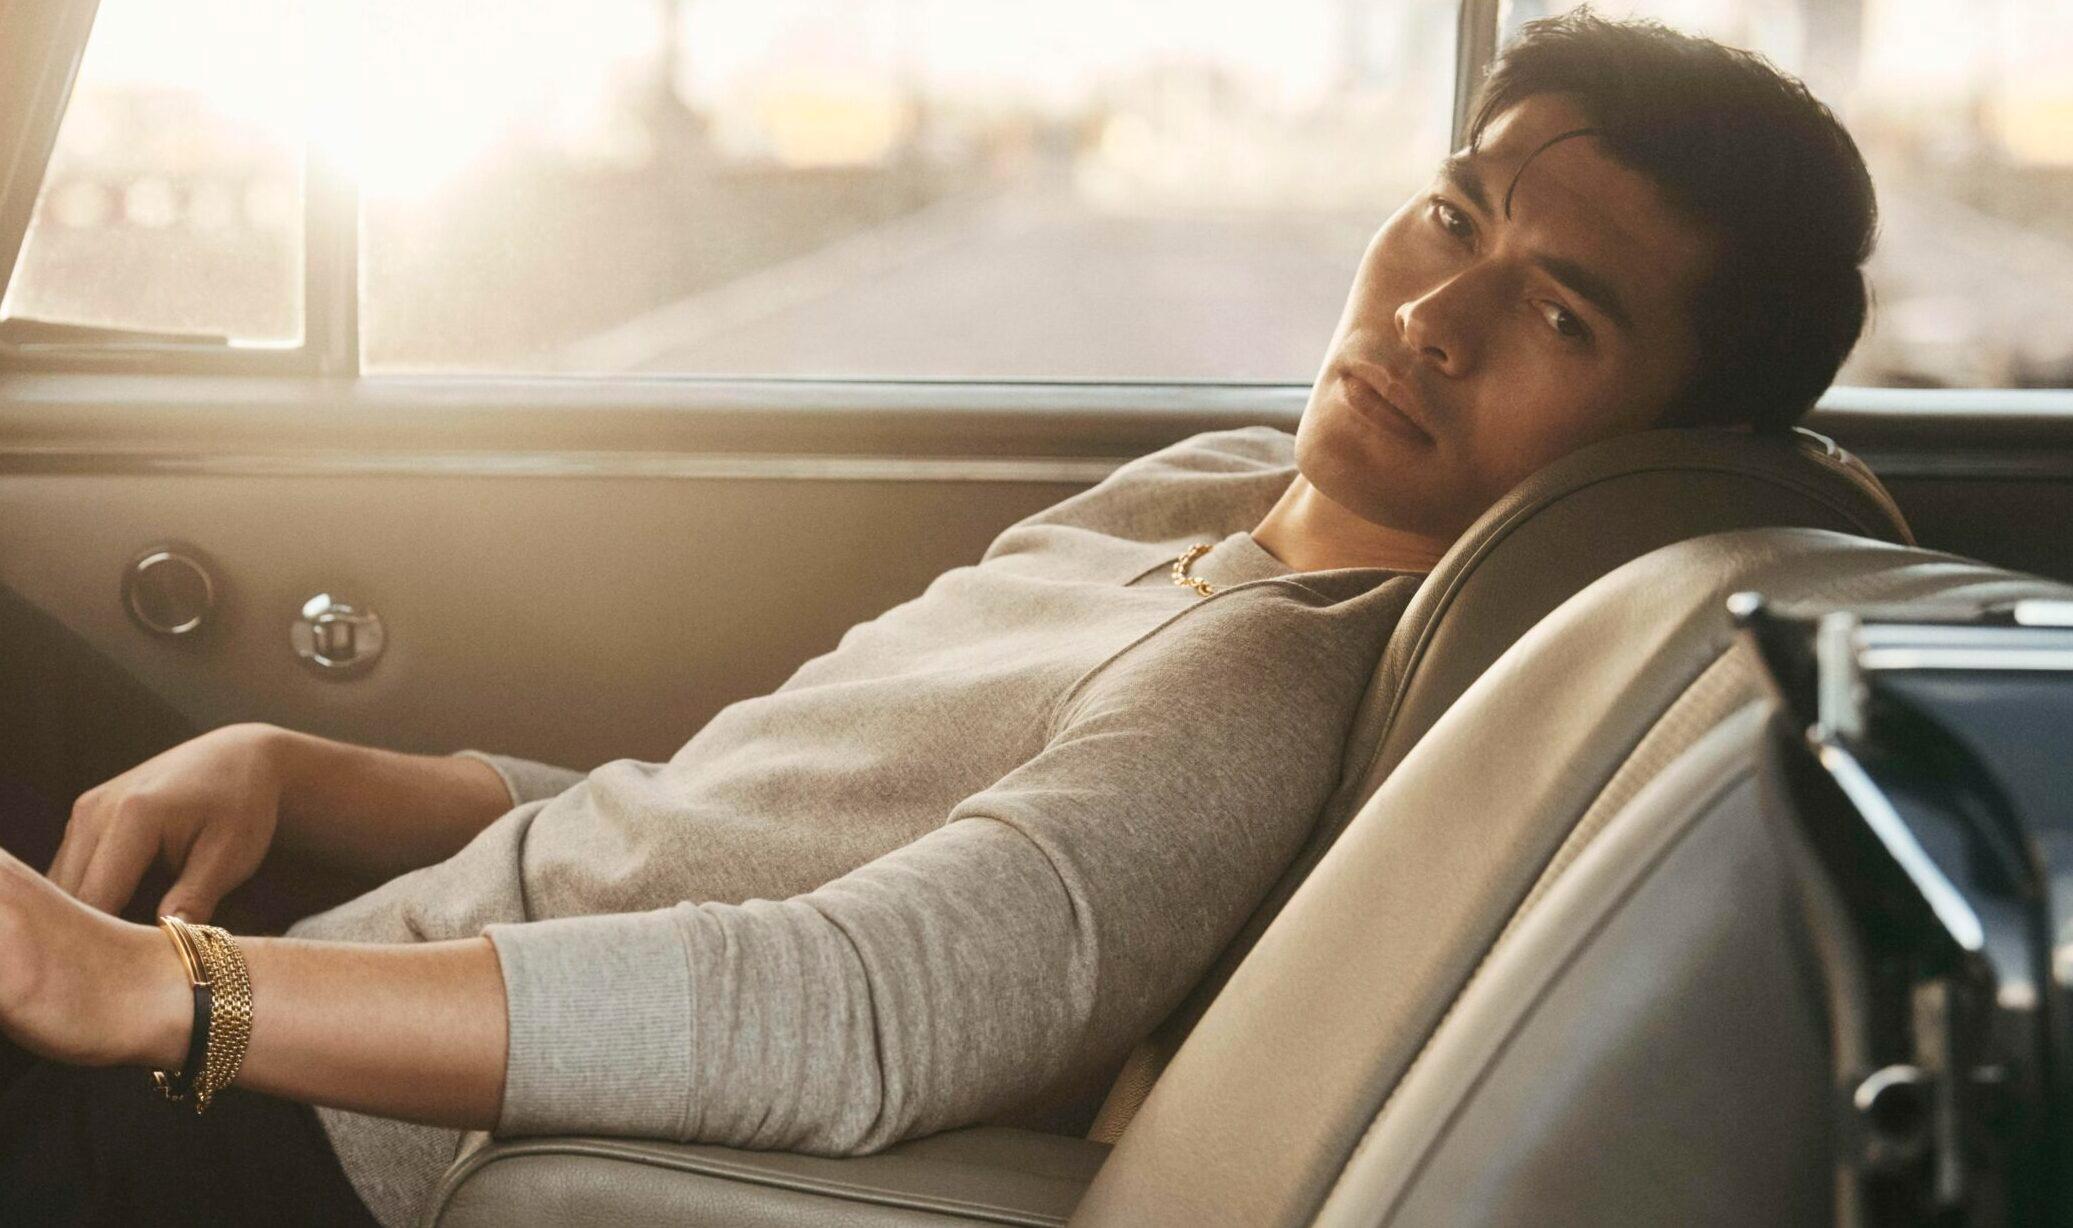 David Yurman unveils new campaign featuring first-ever celebrity brand ambassador duo Scarlett Johansson and Henry Golding